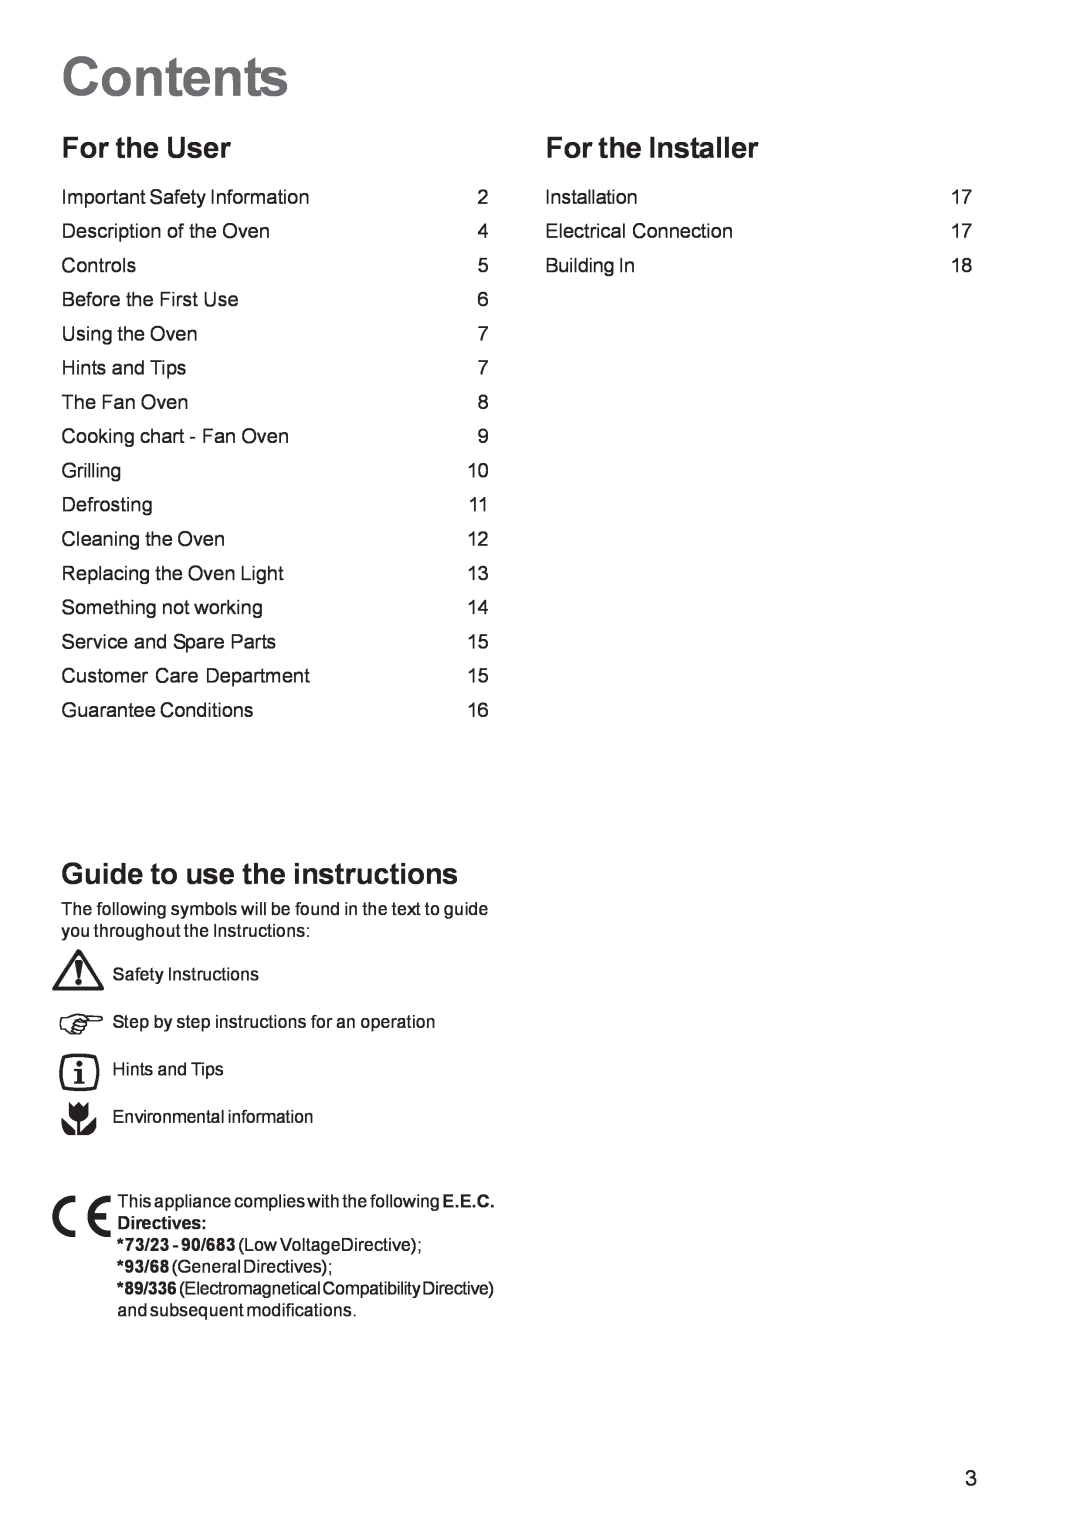 Tricity Bendix TBF 610 manual Contents, For the User, For the Installer, Guide to use the instructions 